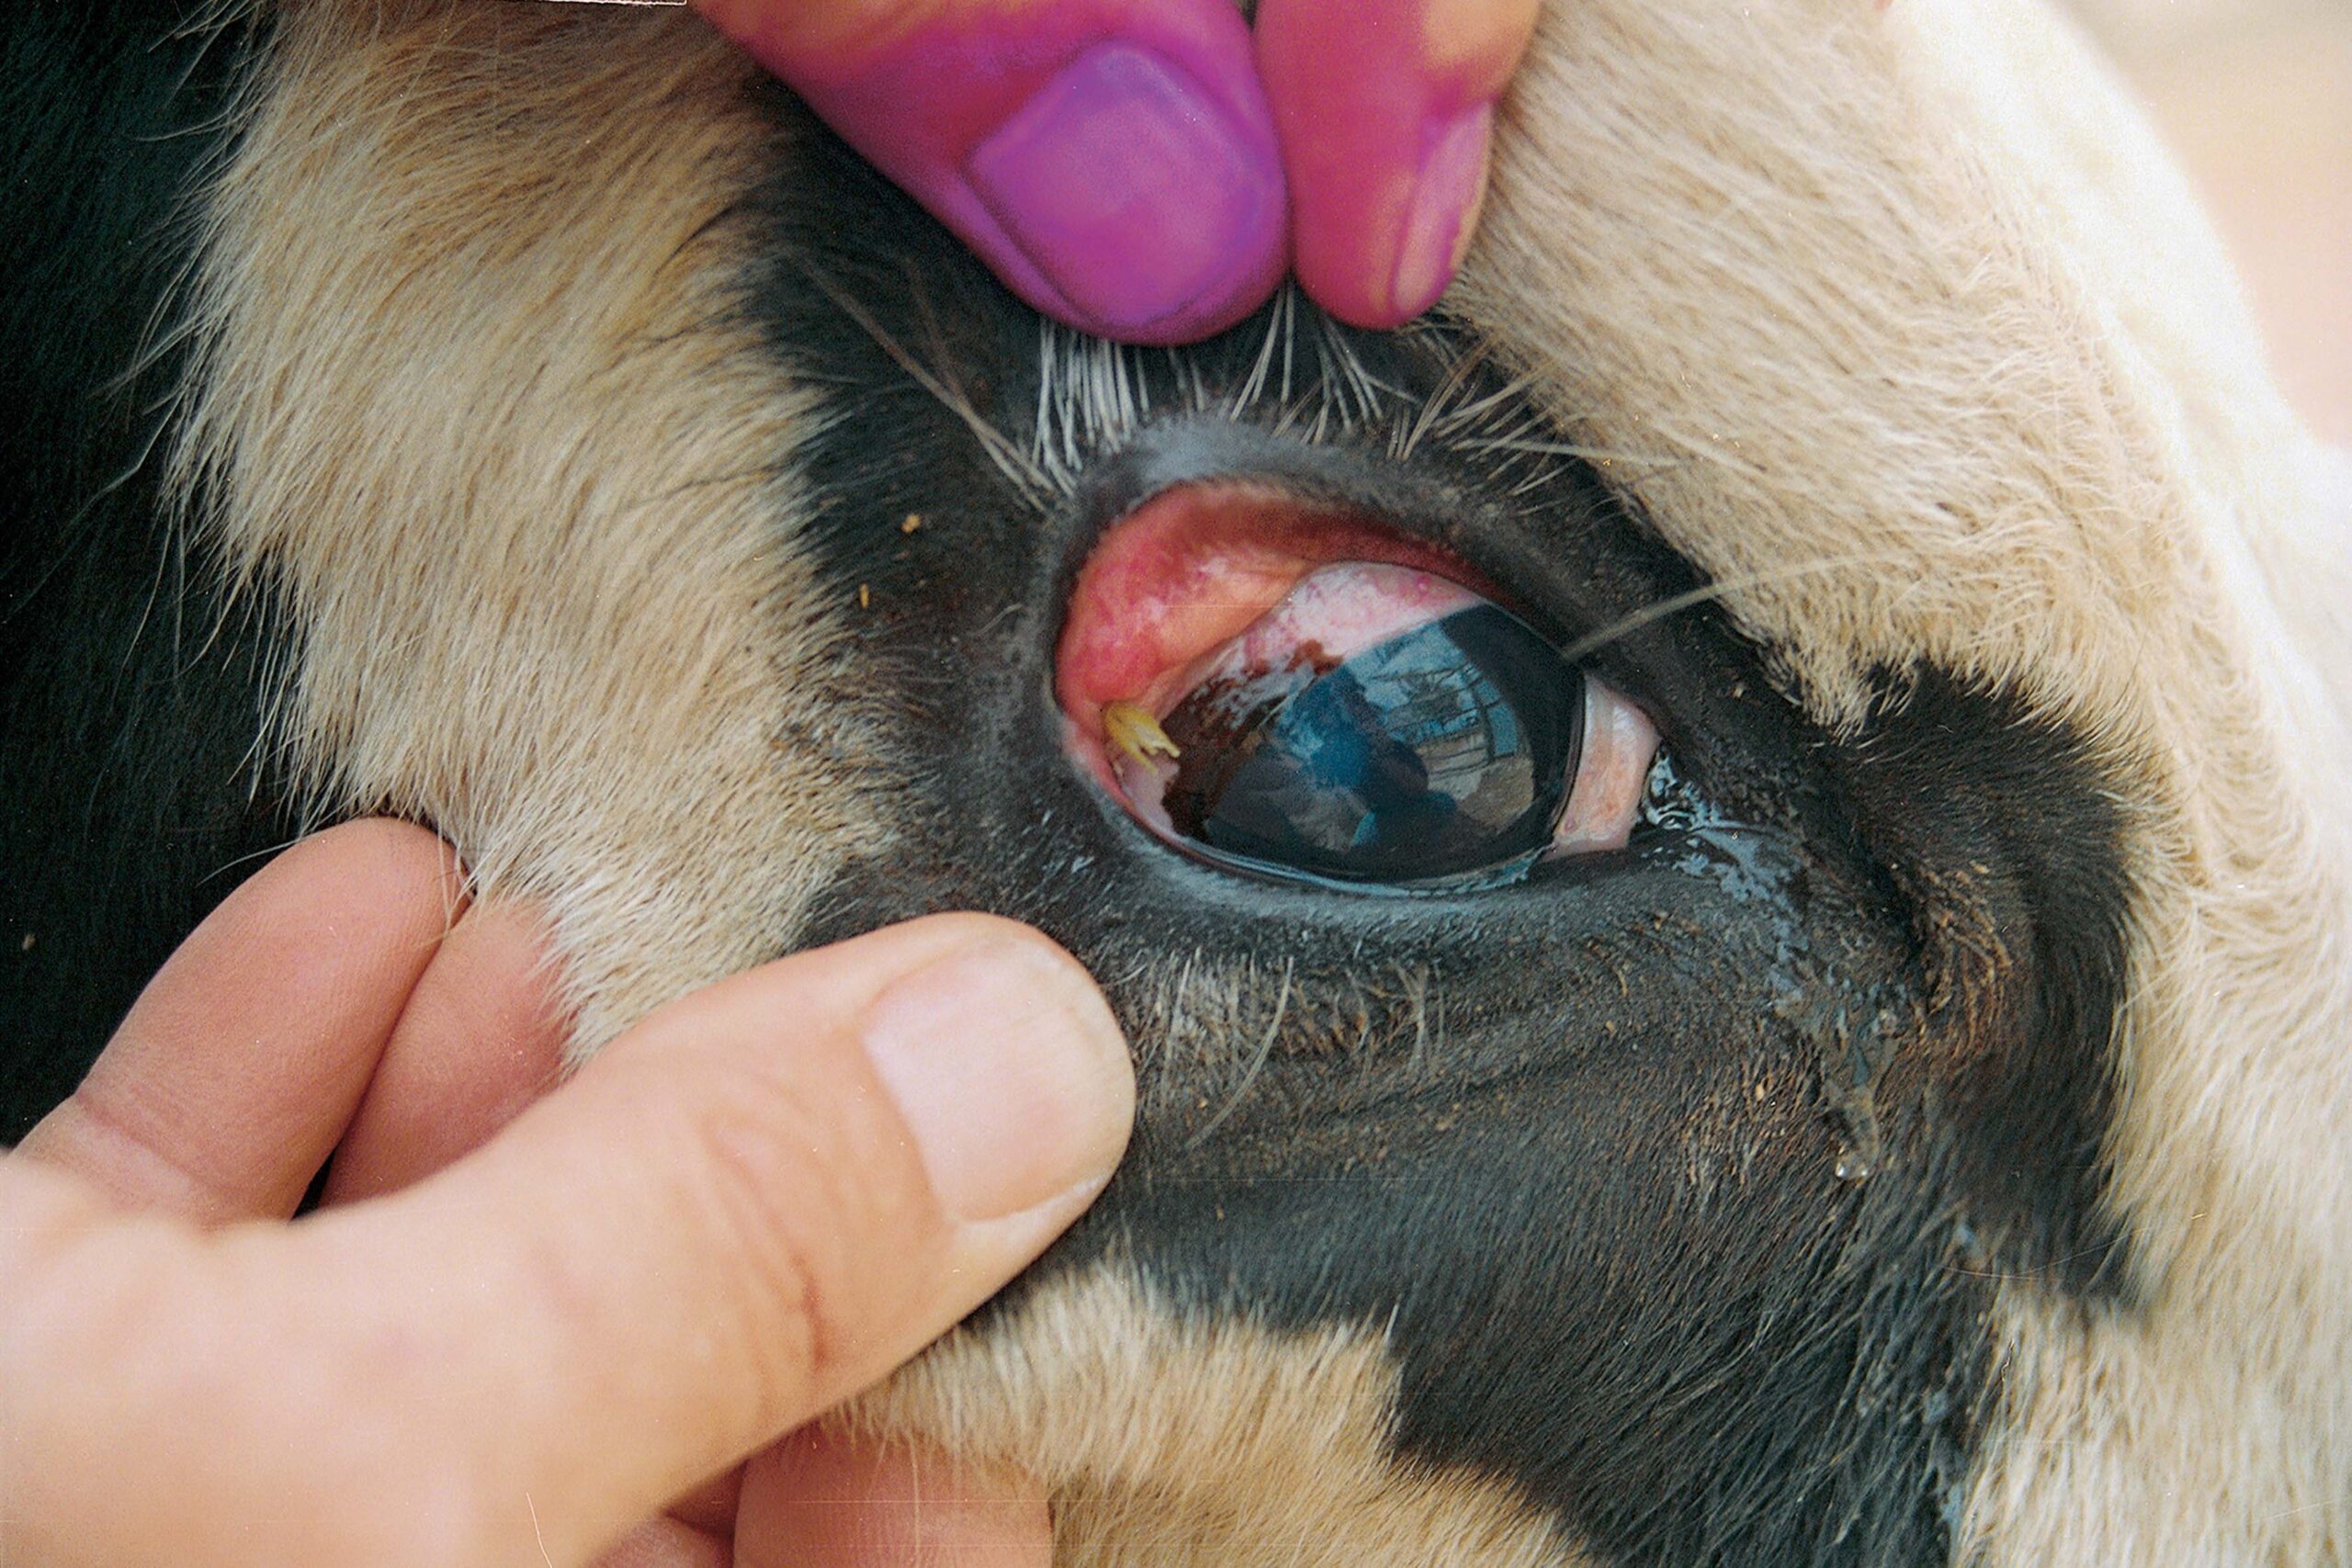 Be alert about pinkeye in livestock during summer